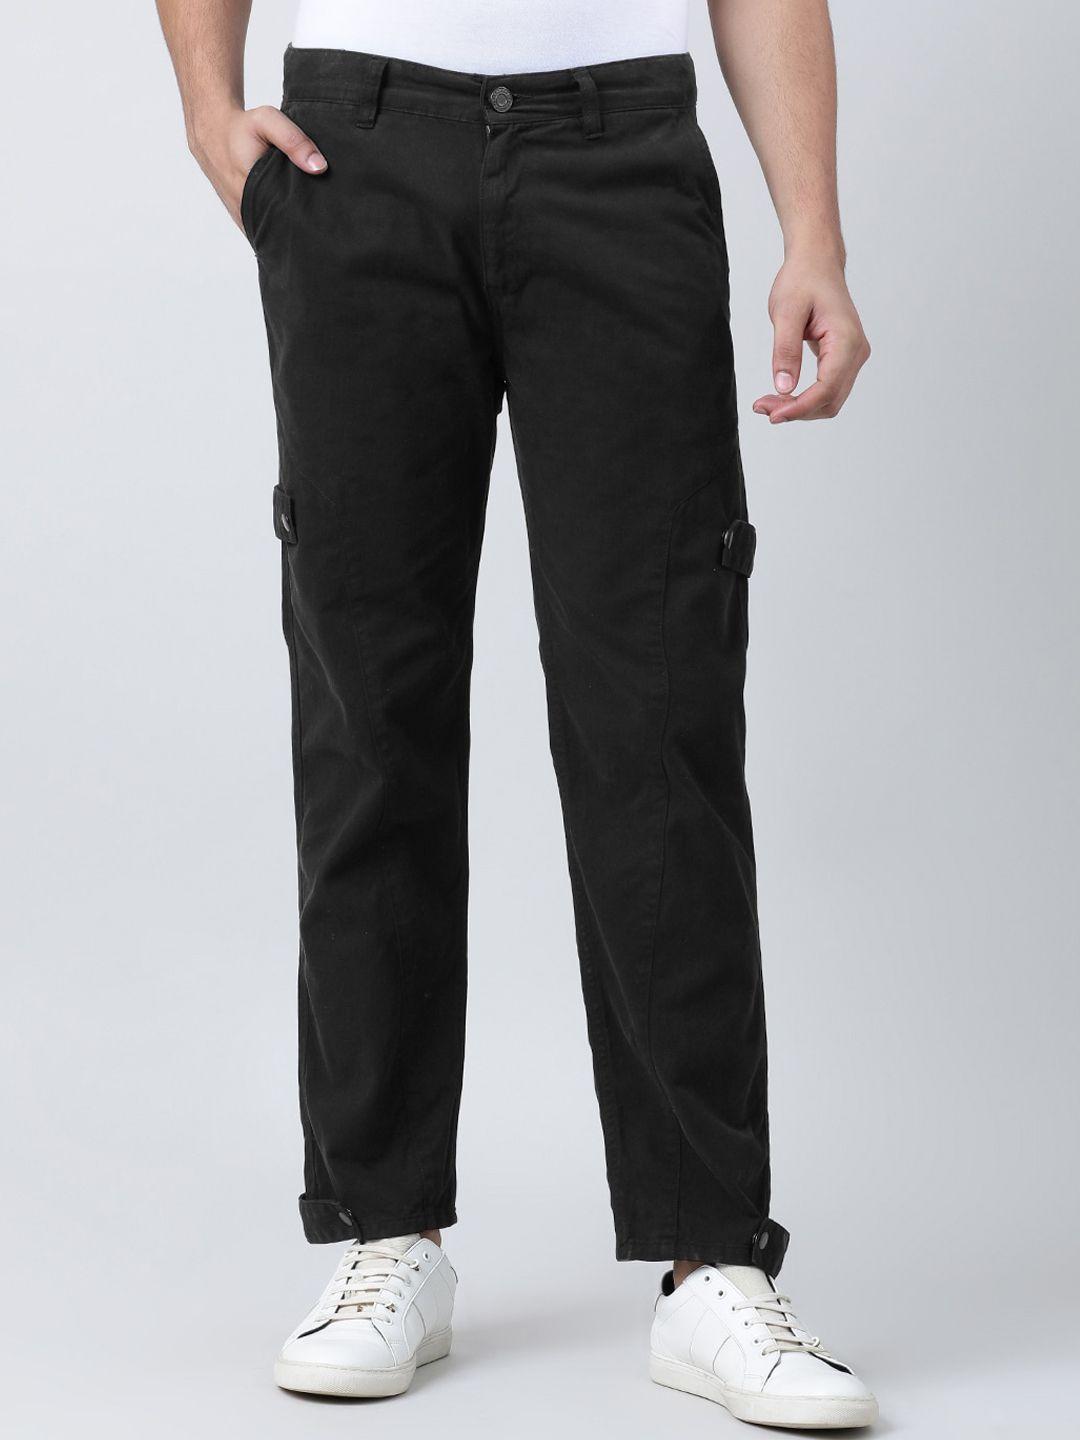 bene kleed men relaxed cotton cargos trousers